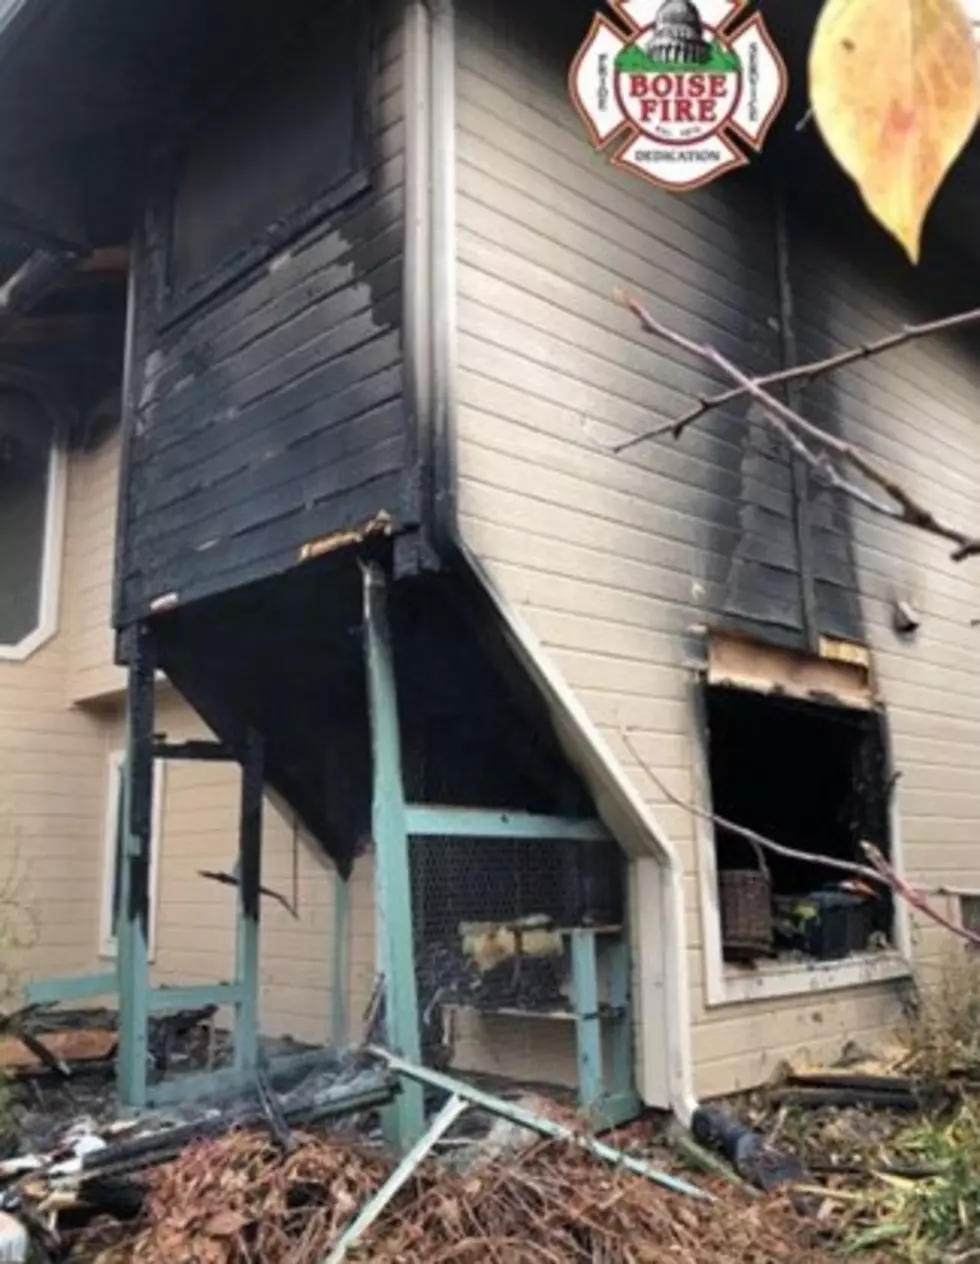 2 Dogs Die and Man Injured in Boise House Fire